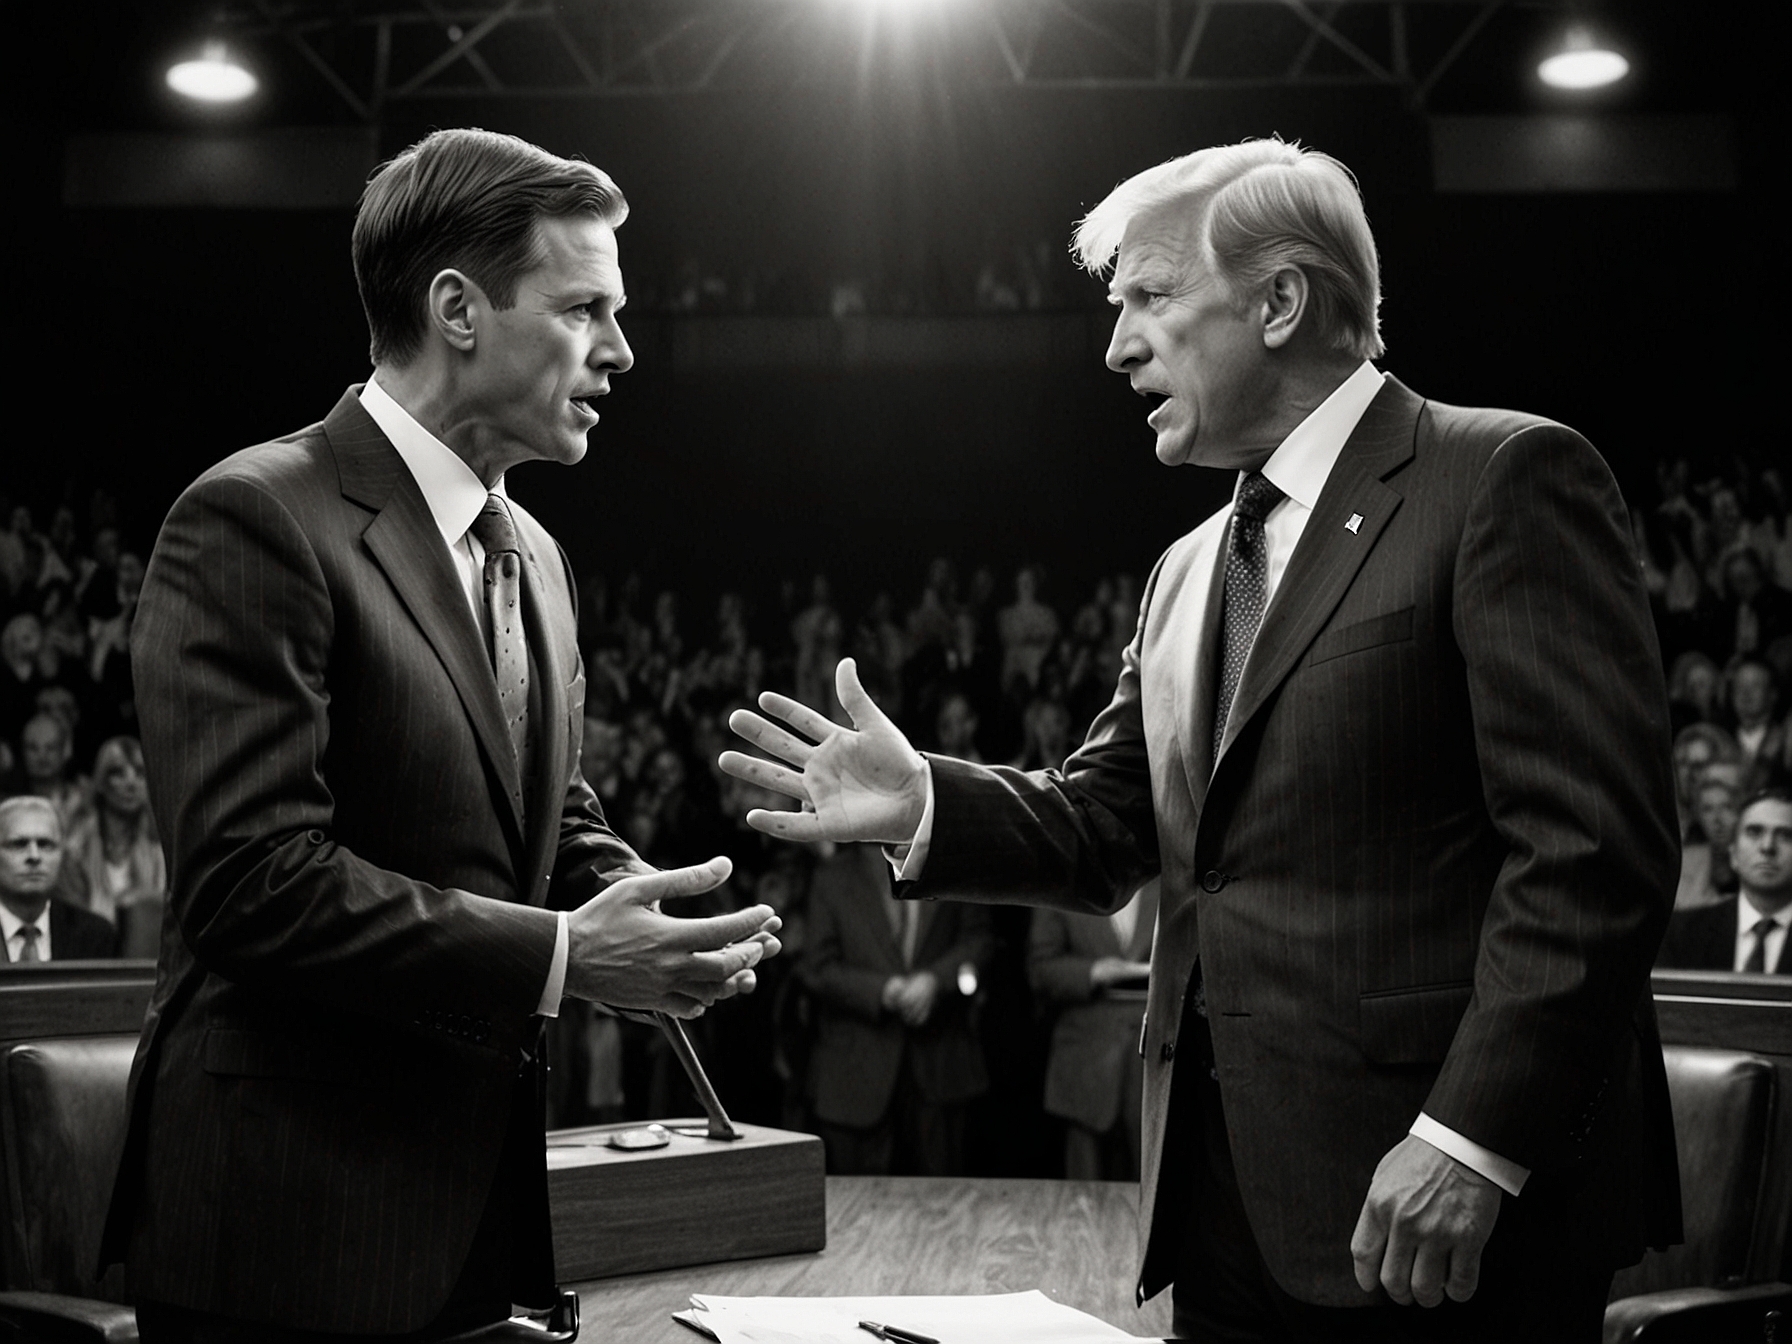 A tense moment where two candidates engage in a heated exchange, highlighting the intensity and drama of the political debate, as the spotlight focuses on their reactions and arguments.